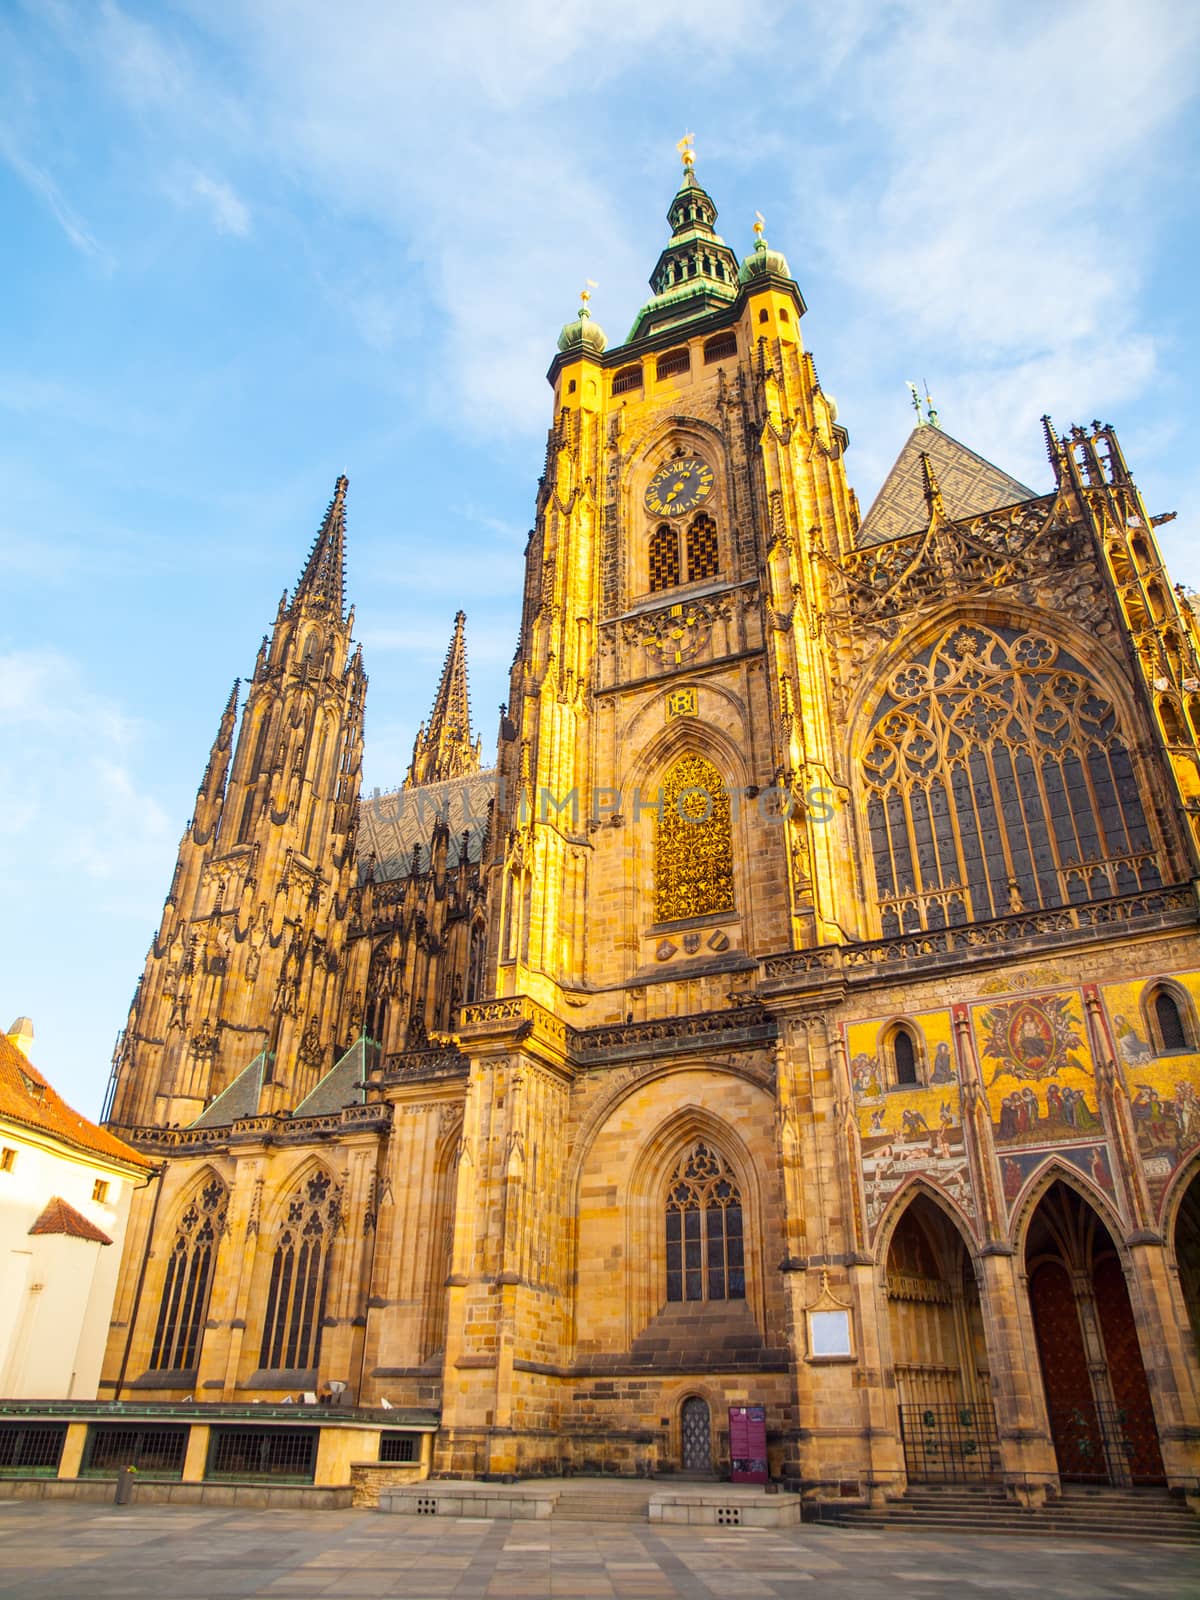 Sunny morning at Saint Vitus Cathedral, Prague Castle, Prague, Czech Republic by pyty